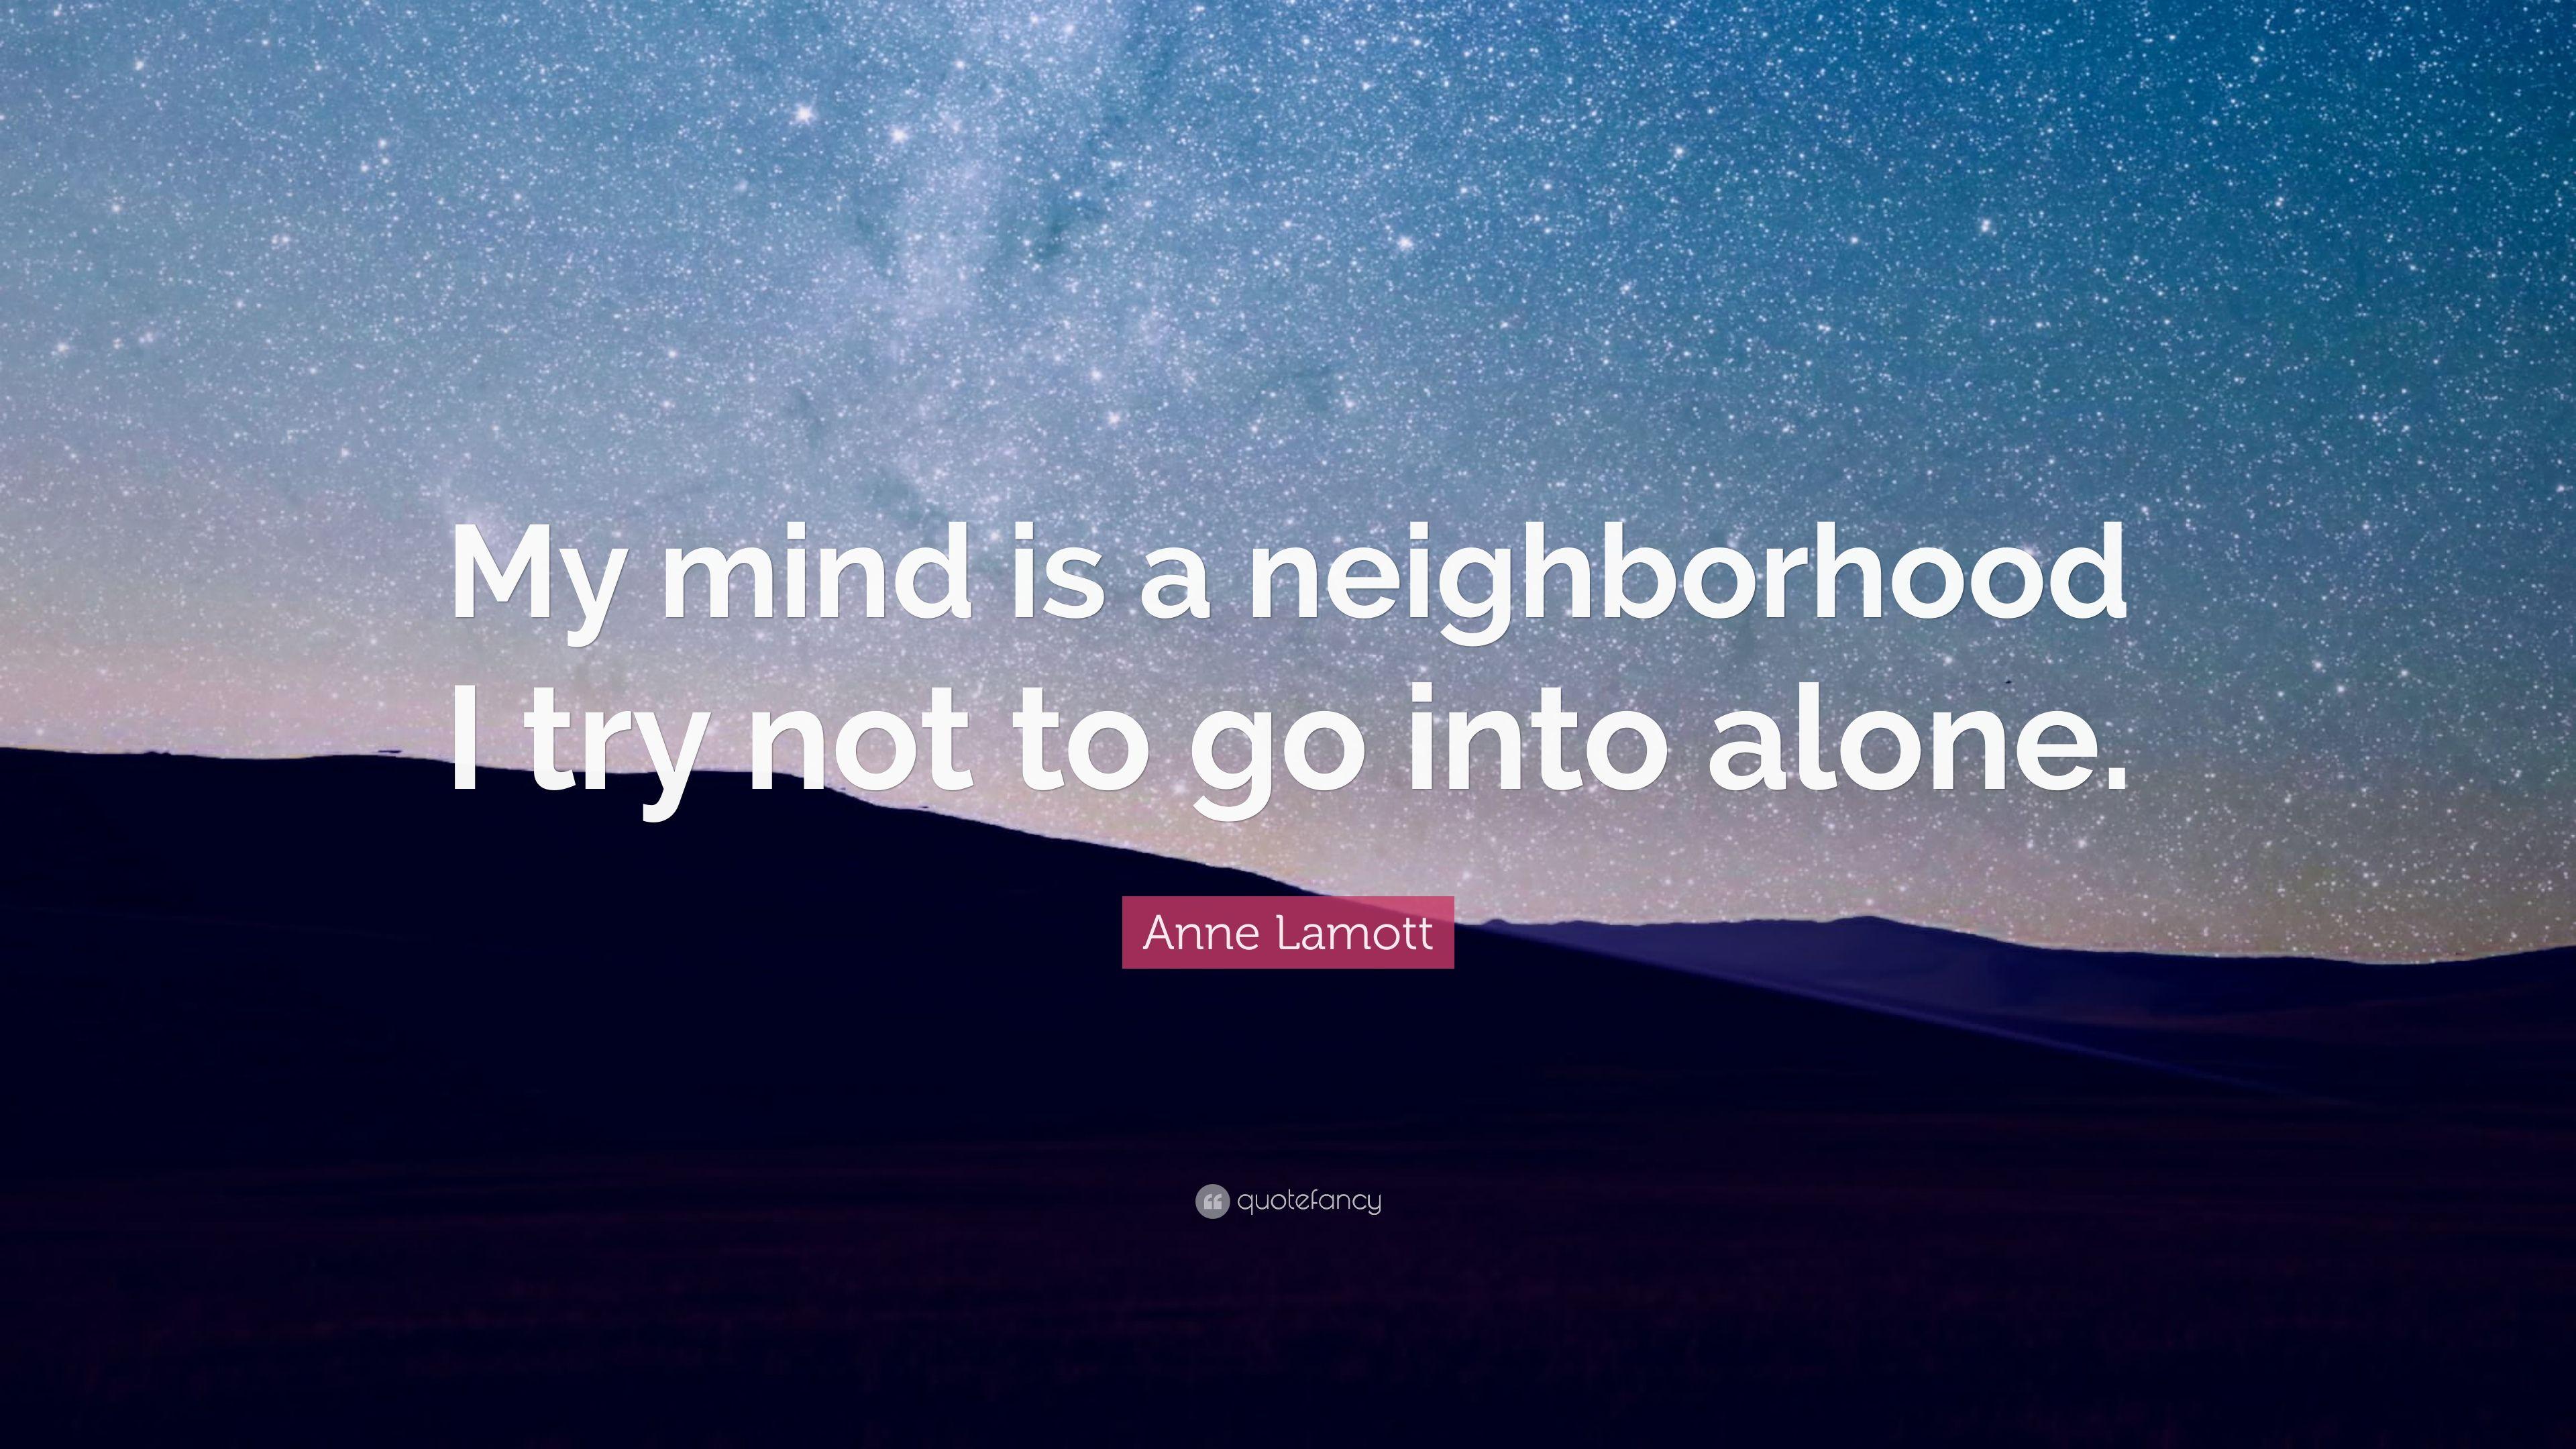 Anne Lamott Quote: “My mind is a neighborhood I try not to go into